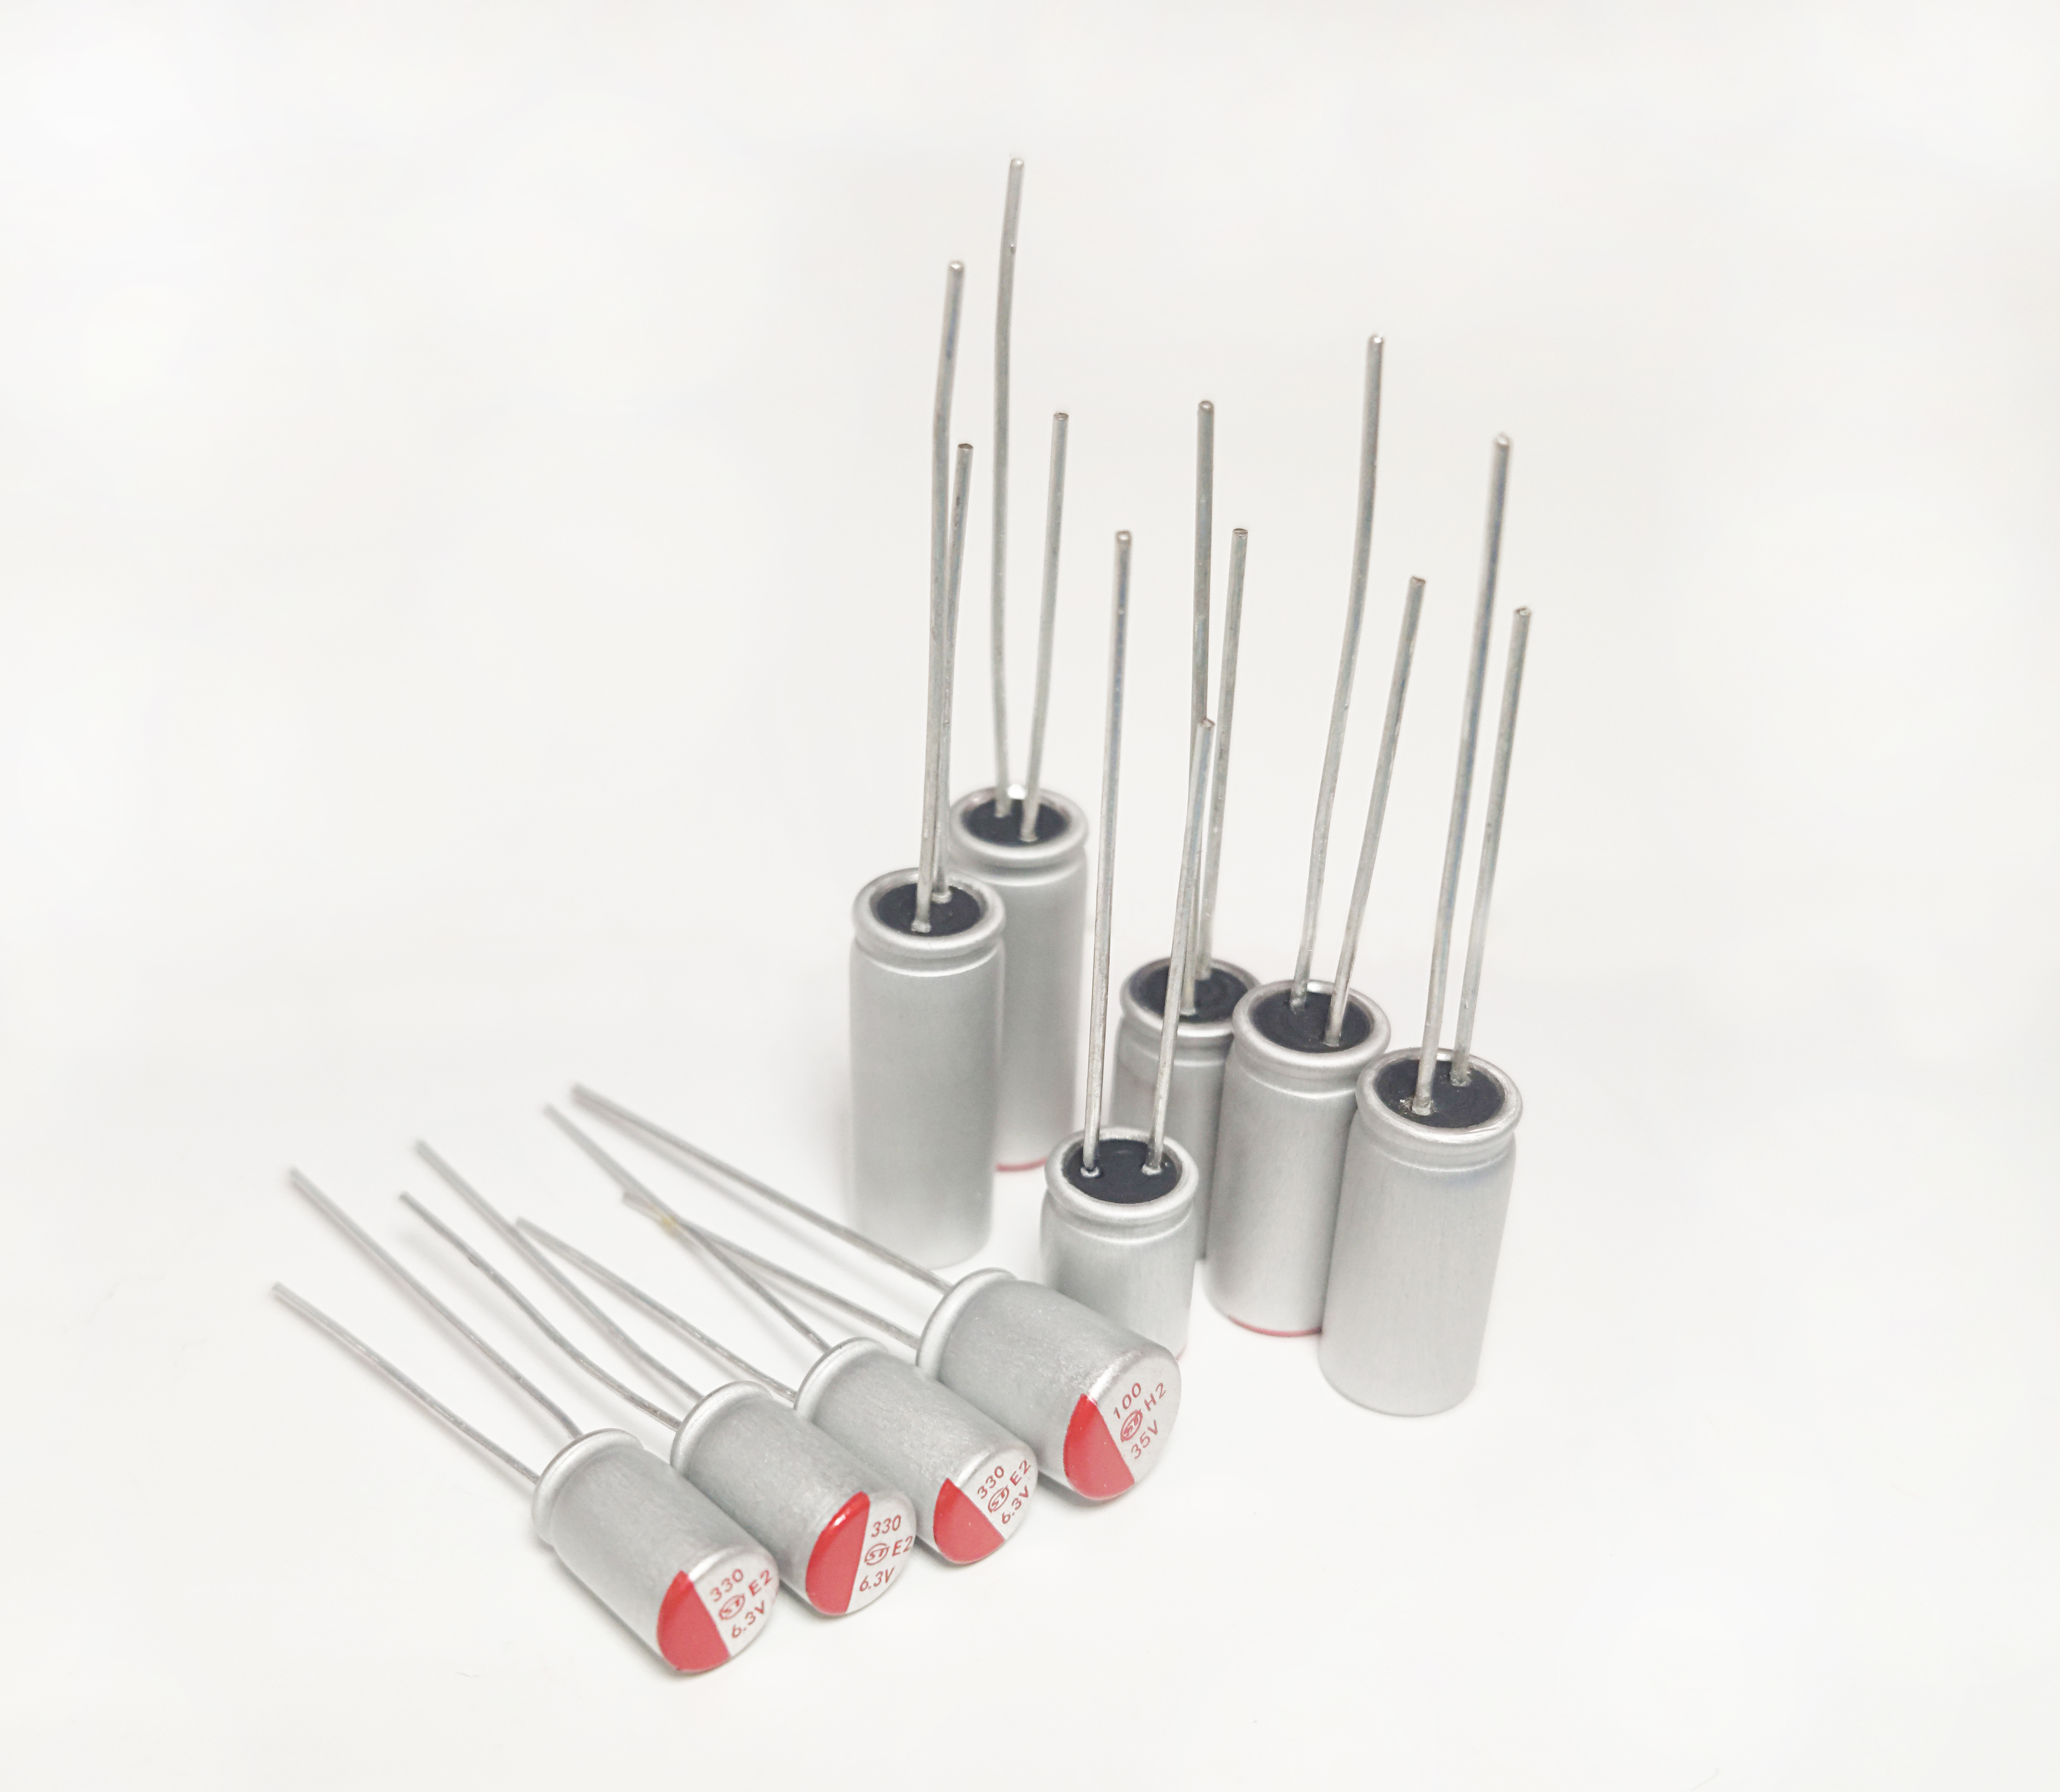 solid electrolytic capacitors